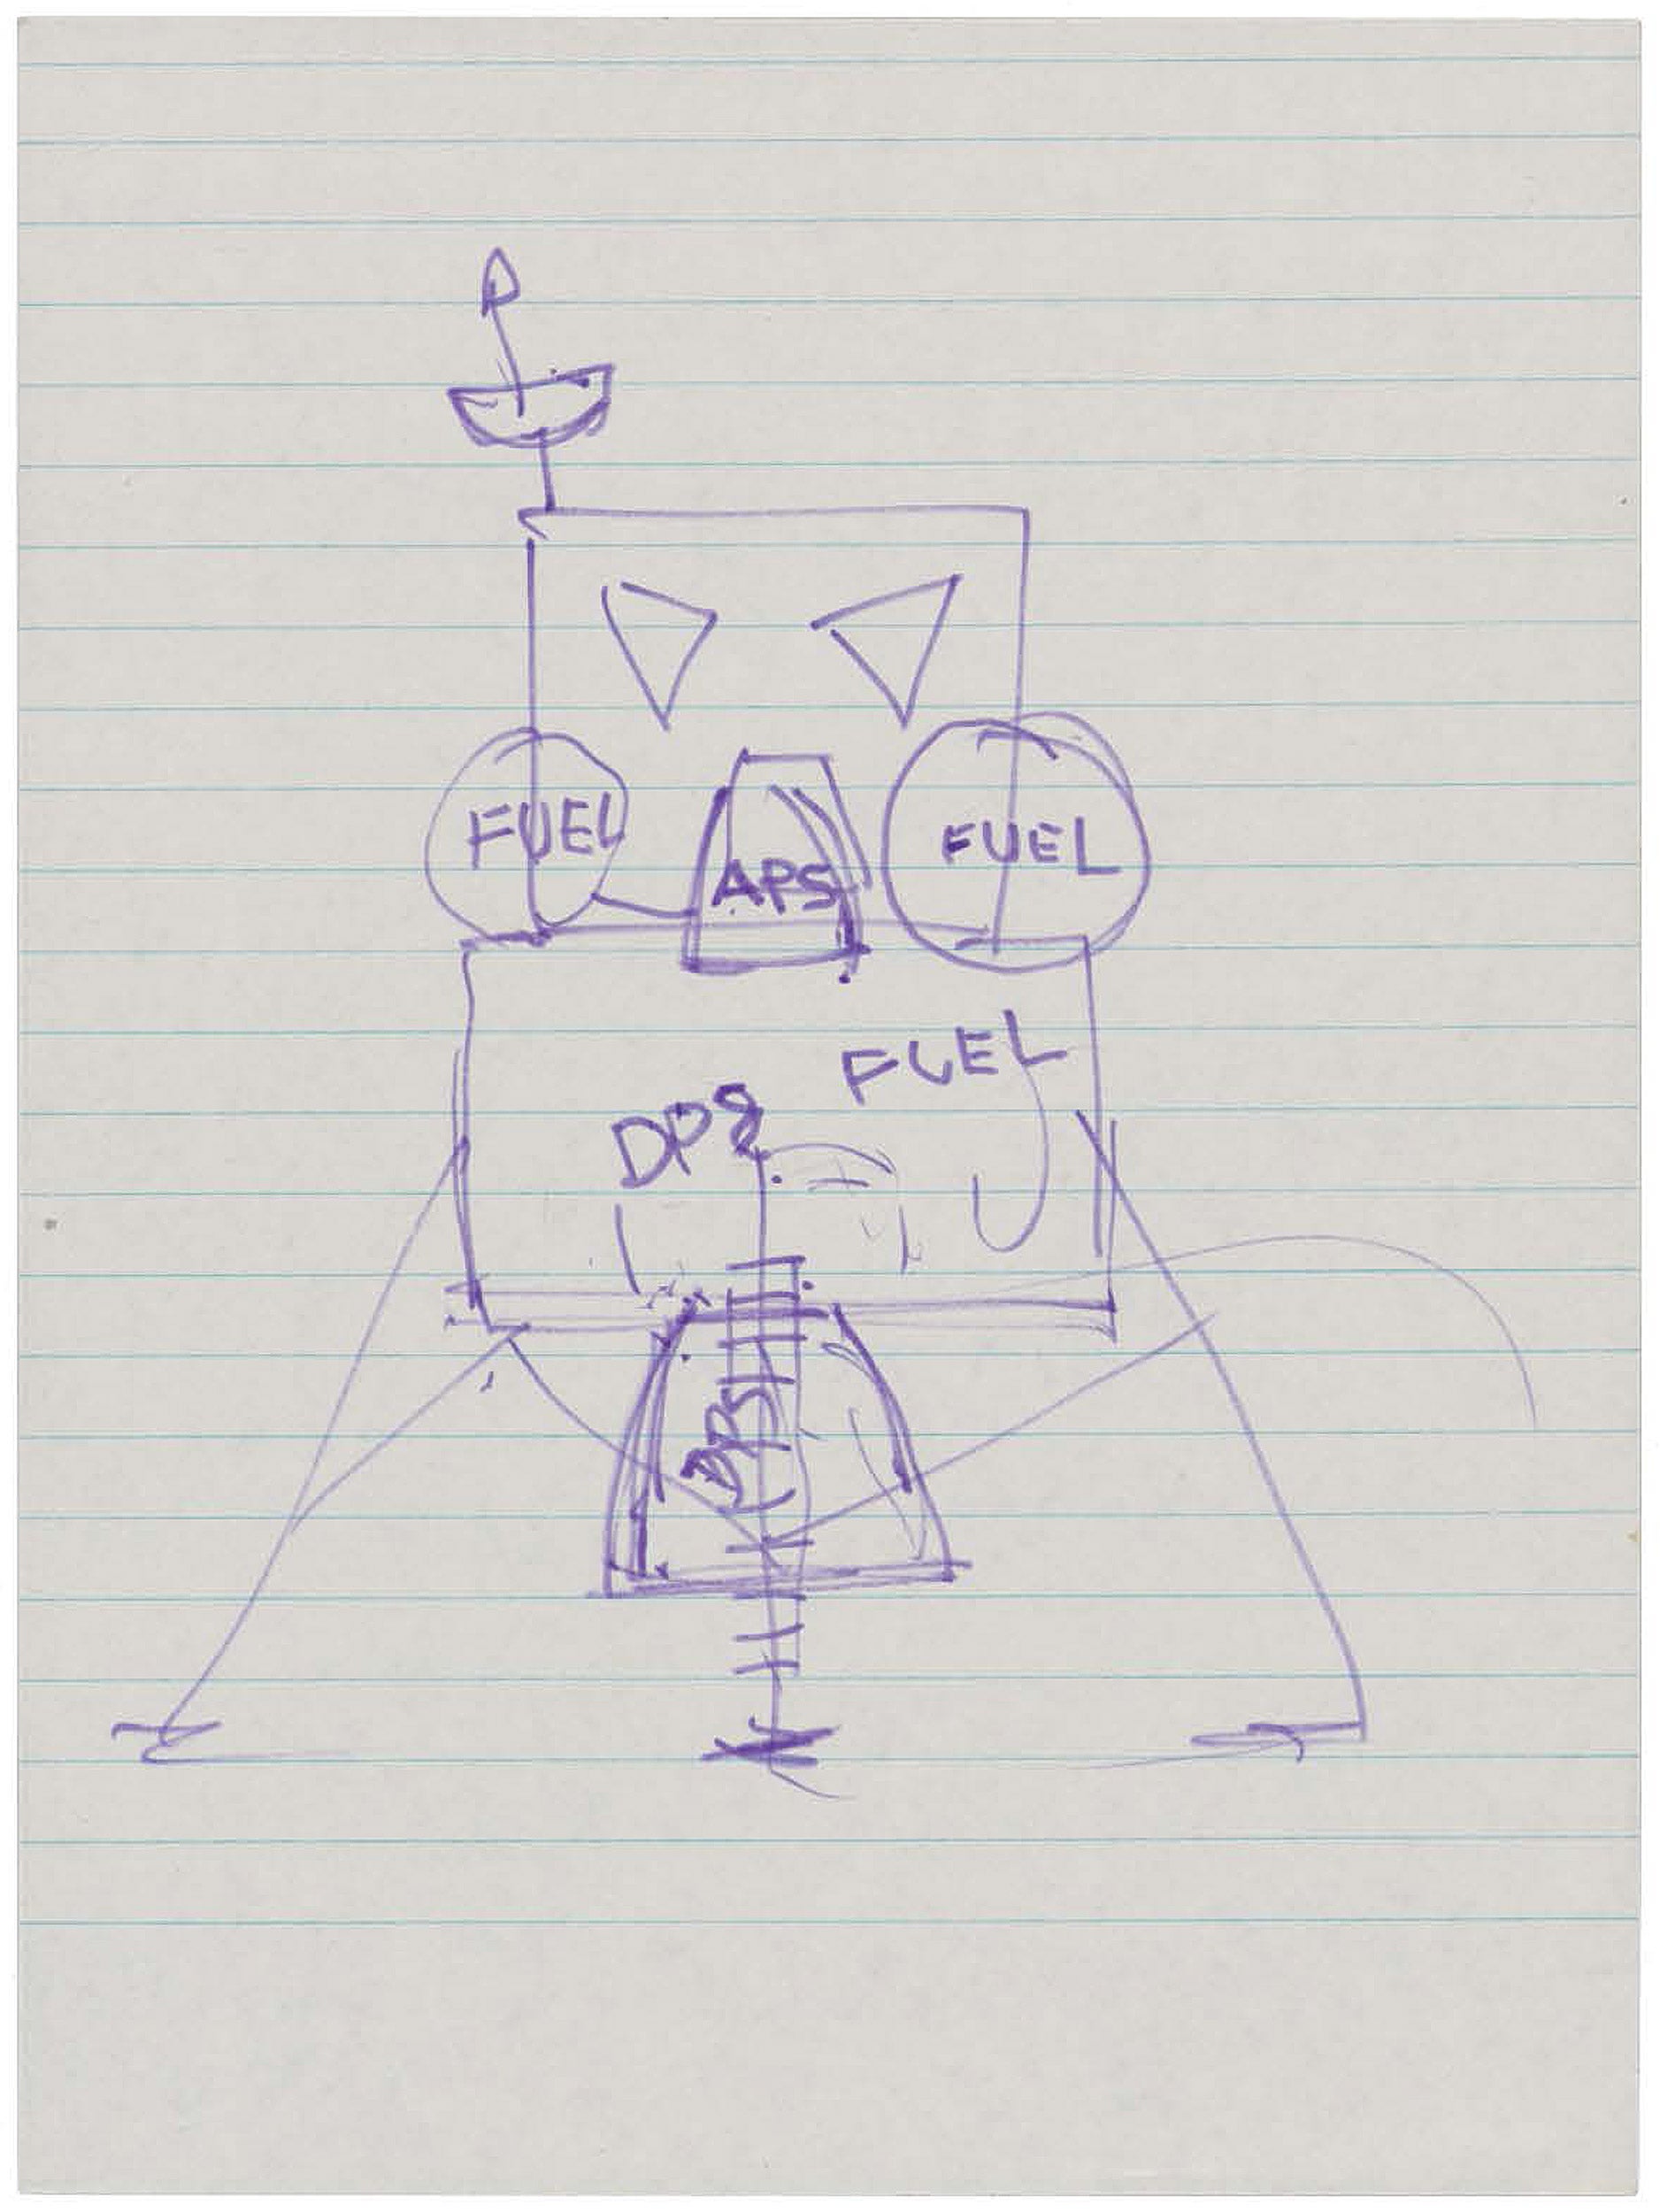 A sketch Neil Armstrong made of the lunar module to explain the upcoming Apollo 11 mission to his father.